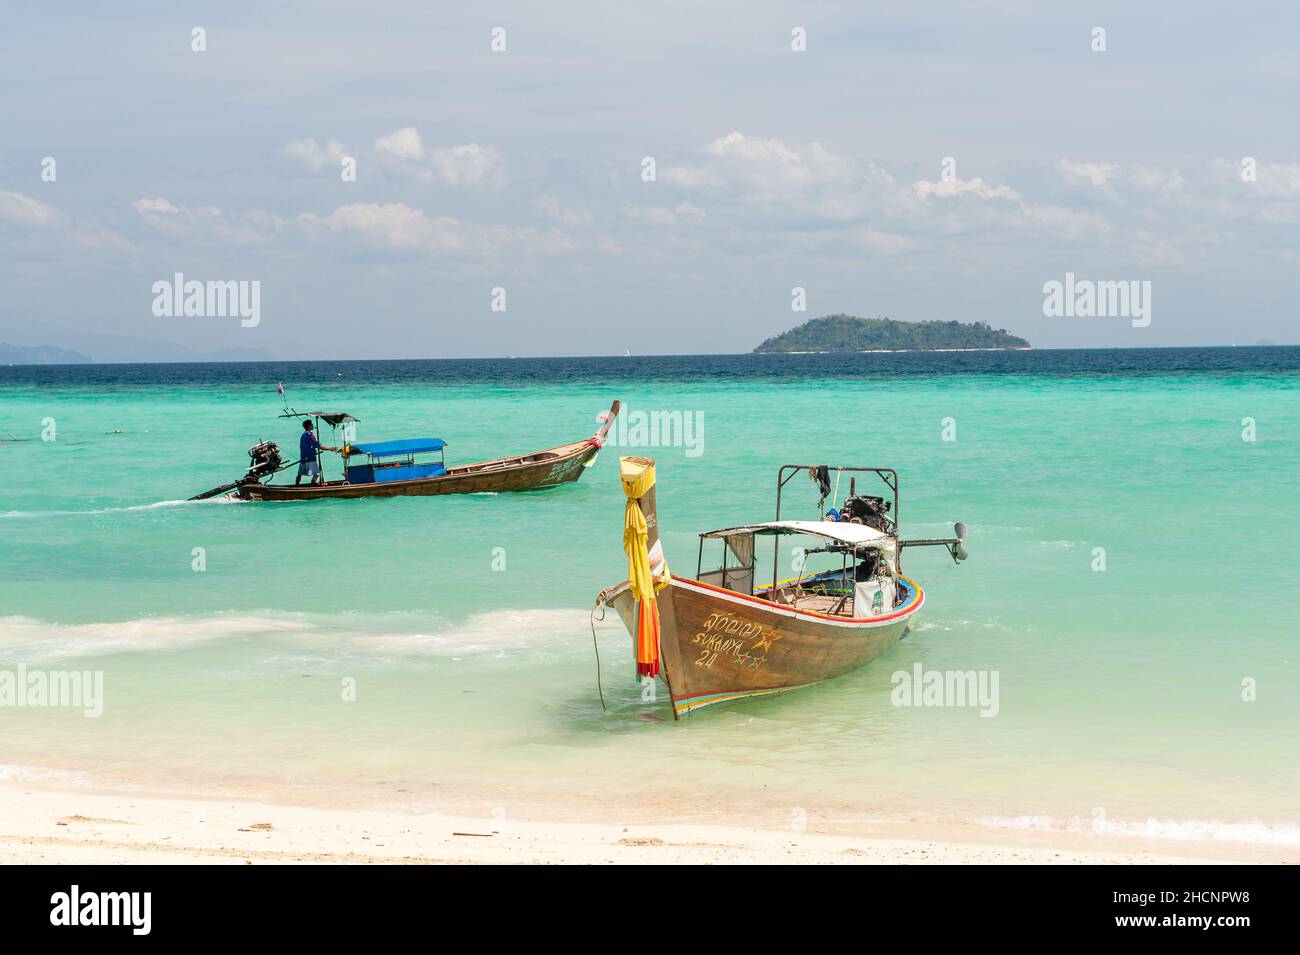 Laem Tong Beach at Phi Phi Islands. These tropical islands are a popular tour destination from Phuket and Krabi in Thailand. Stock Photo